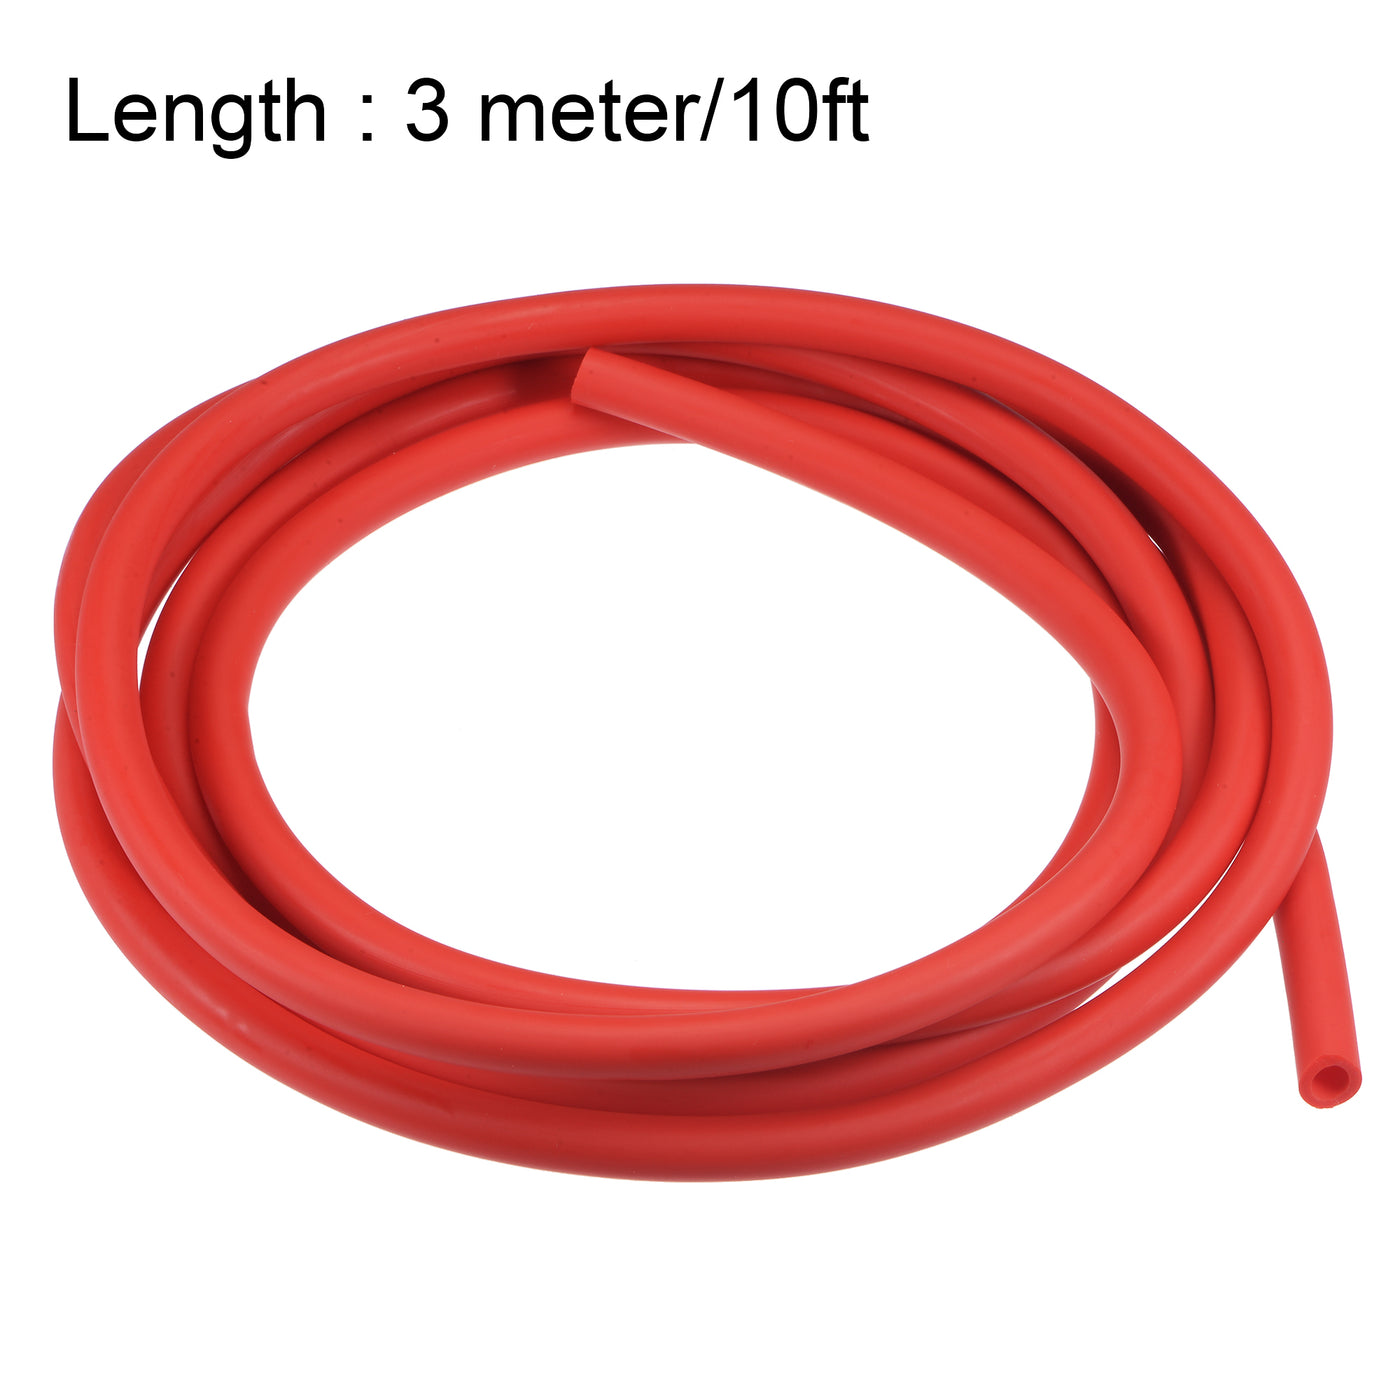 uxcell Uxcell Latex Tubing 1/4-inch ID 3/8-inch OD 10ft Elastic Rubber Hose Red